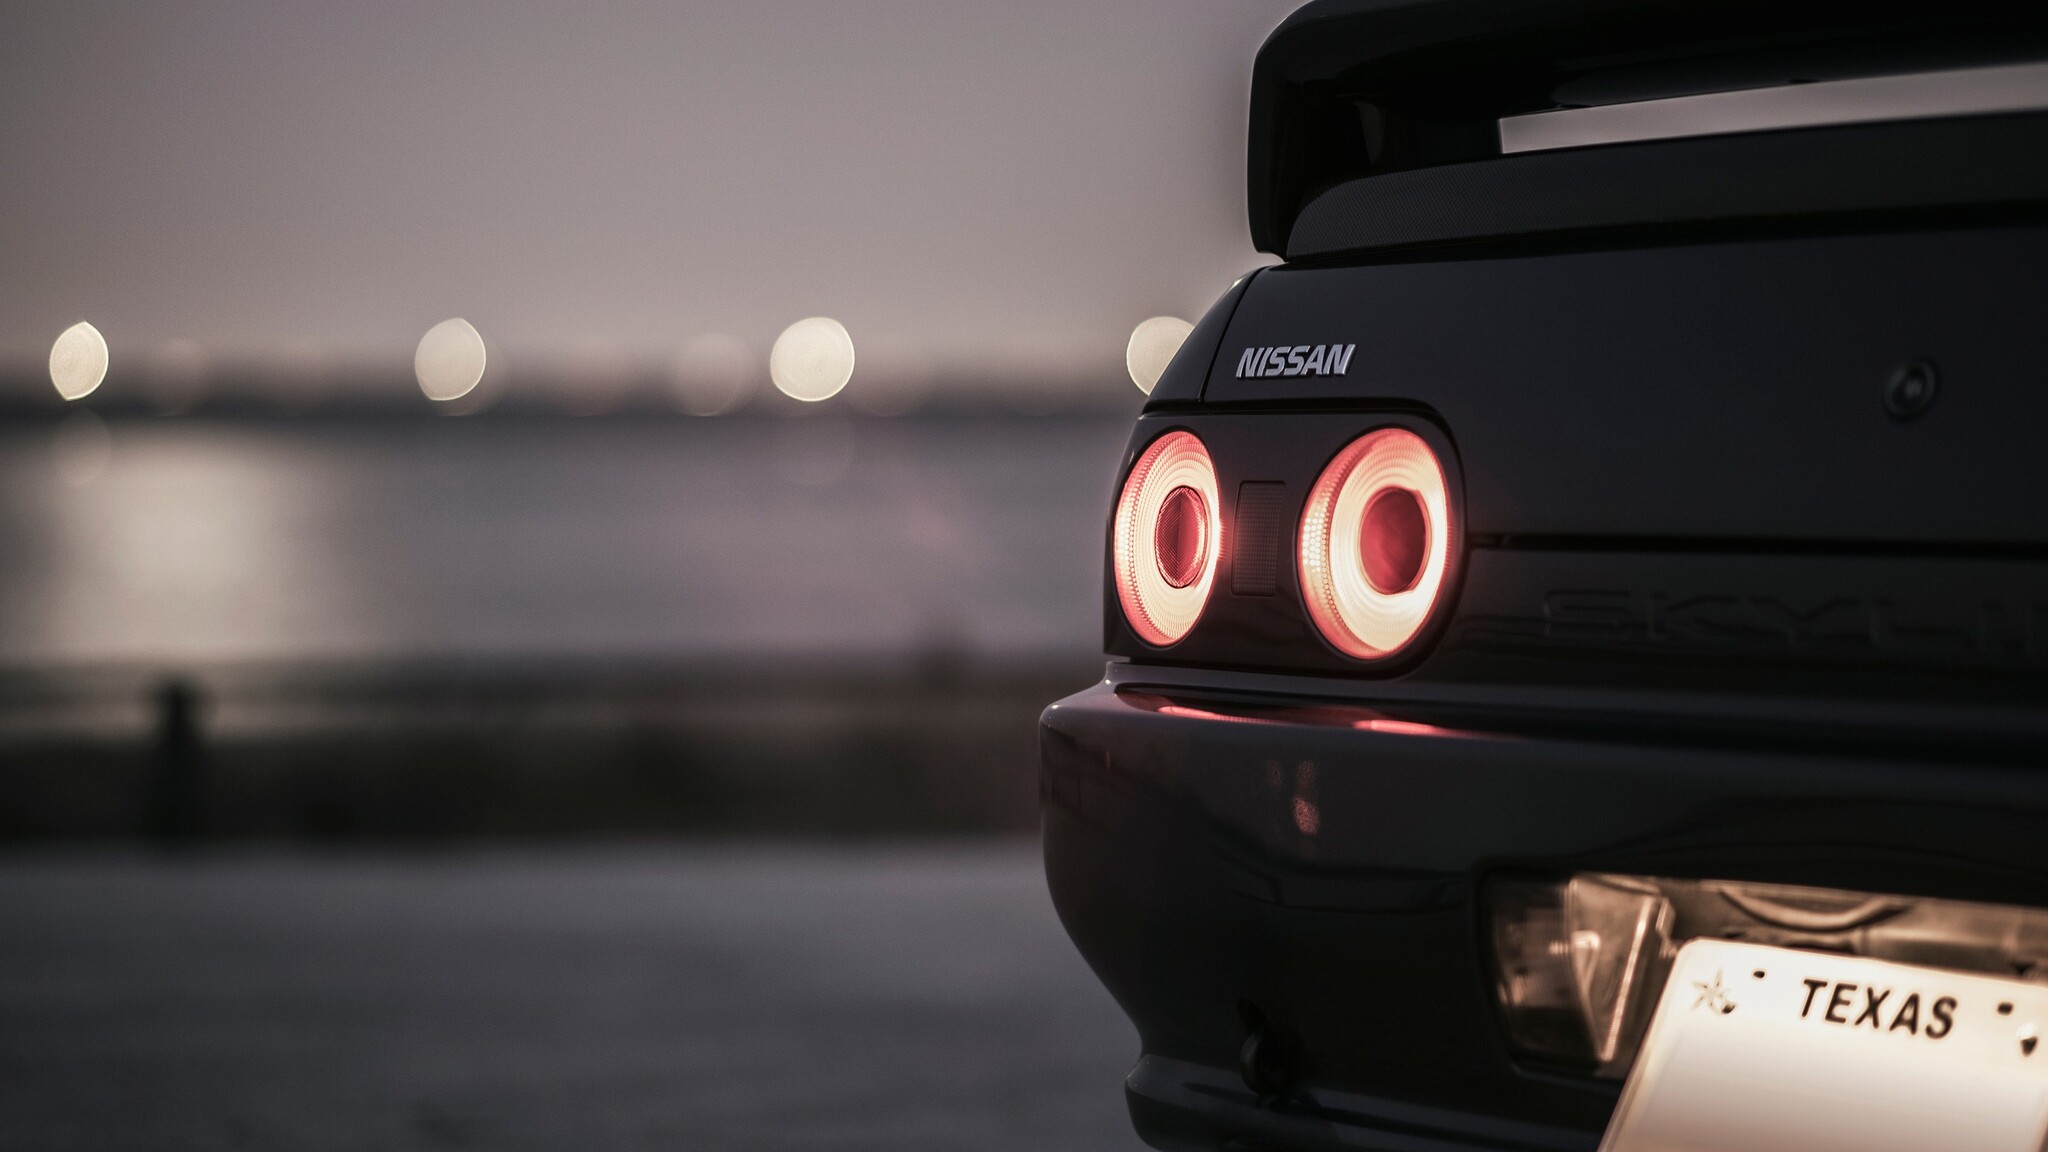 Free Download Skyline R32 Wallpaper 48x1152 Download Hd Wallpaper 48x1152 For Your Desktop Mobile Tablet Explore 16 R32 Wallpaper R32 Gtr Wallpaper Vw R32 Wallpaper Skyline R32 Wallpapers